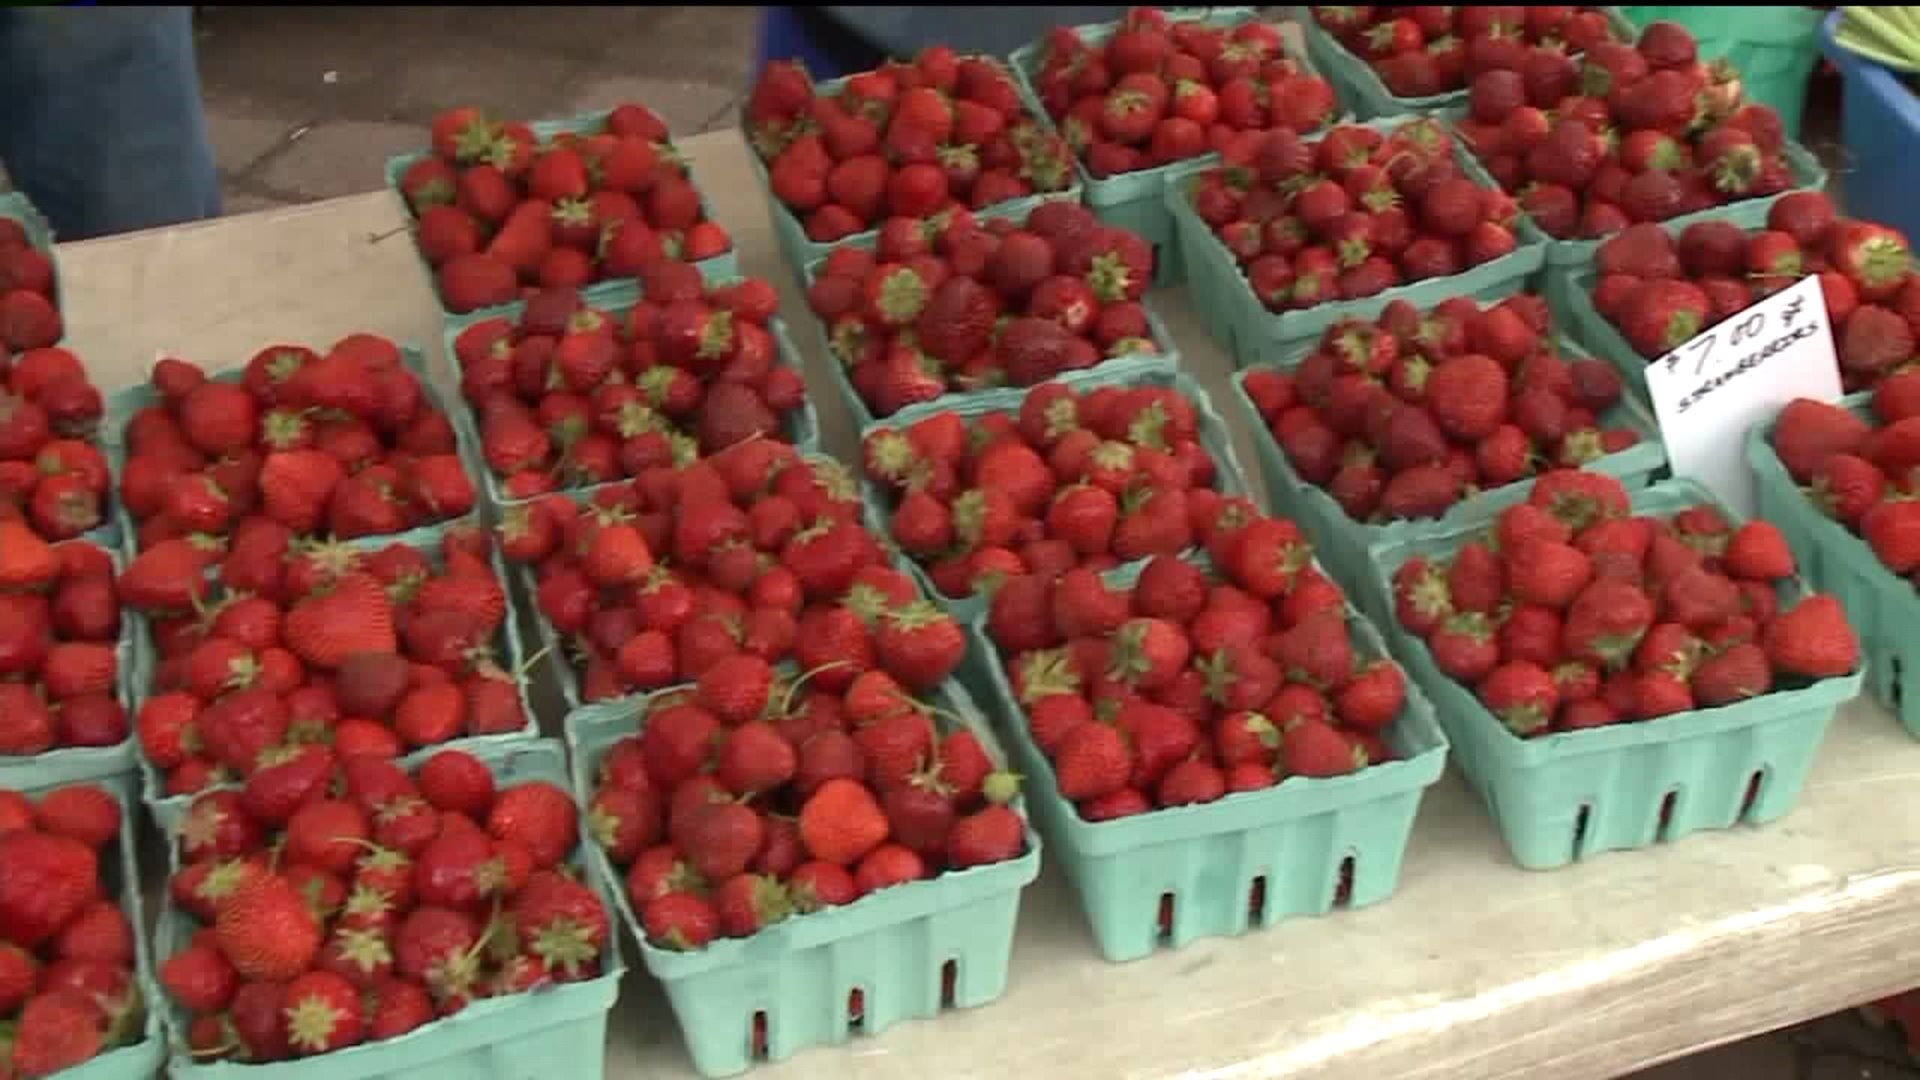 Rainy Weather Hurts Strawberry Festival in Wilkes-Barre